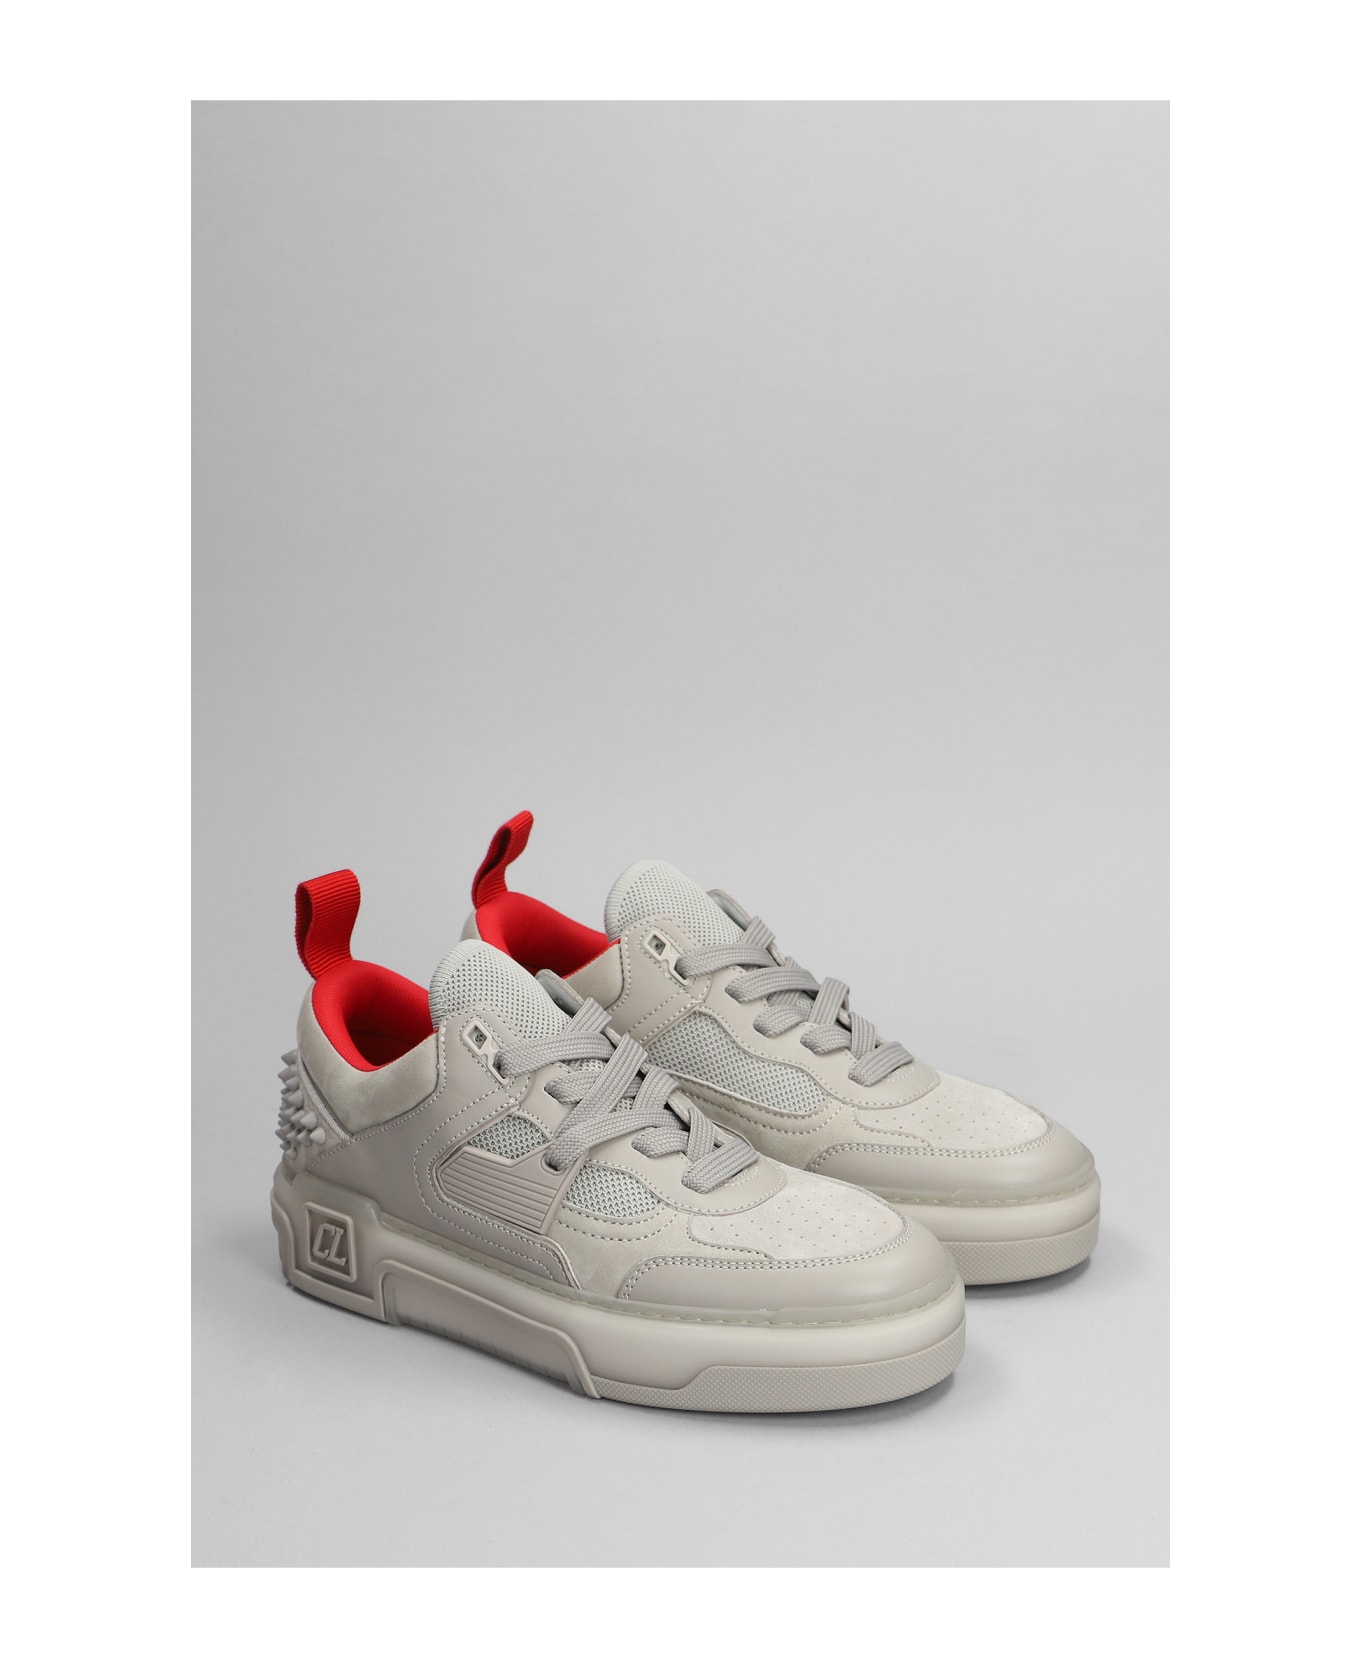 Christian Louboutin Astroloubi Sneakers In Grey Suede And Leather - grey